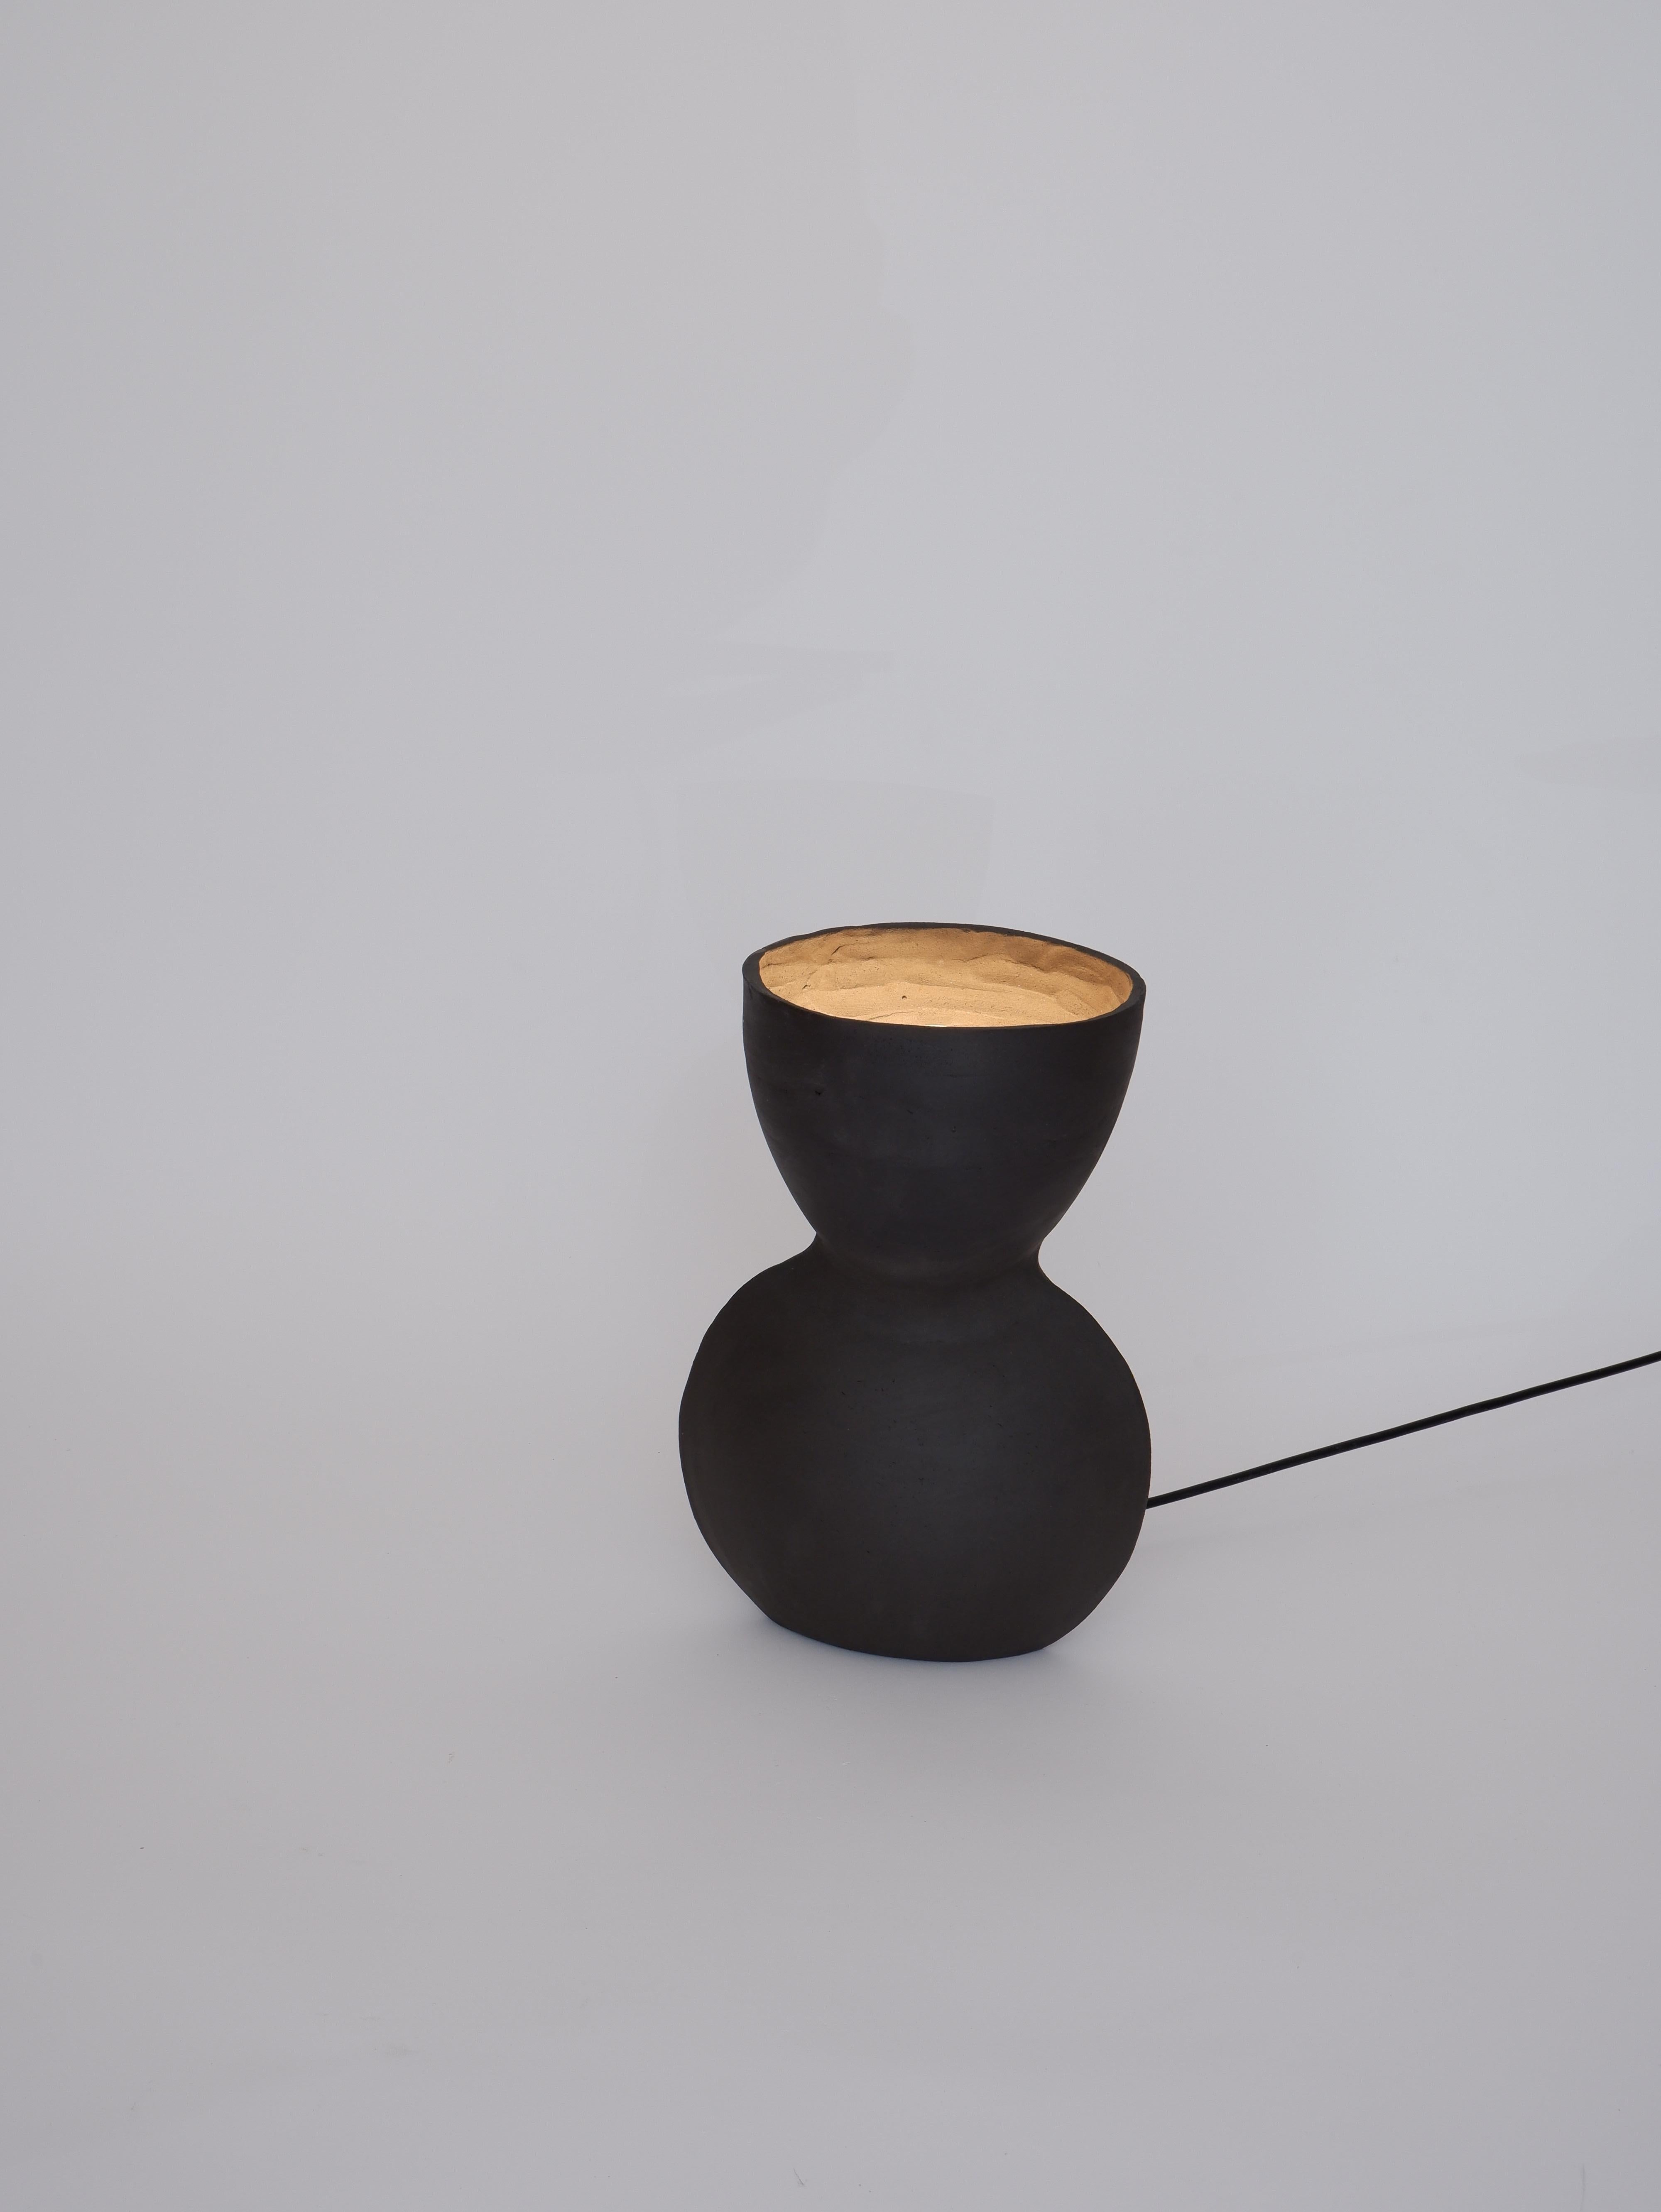 Unira Small Black Lamp by Ia Kutateladze
One Of A Kind.
Dimensions: D 14 x W 18 x H 25 cm.
Materials: Clay.

Each piece is one of a kind, due to its free hand-building process. Different color variations available: raw black clay, raw white clay and